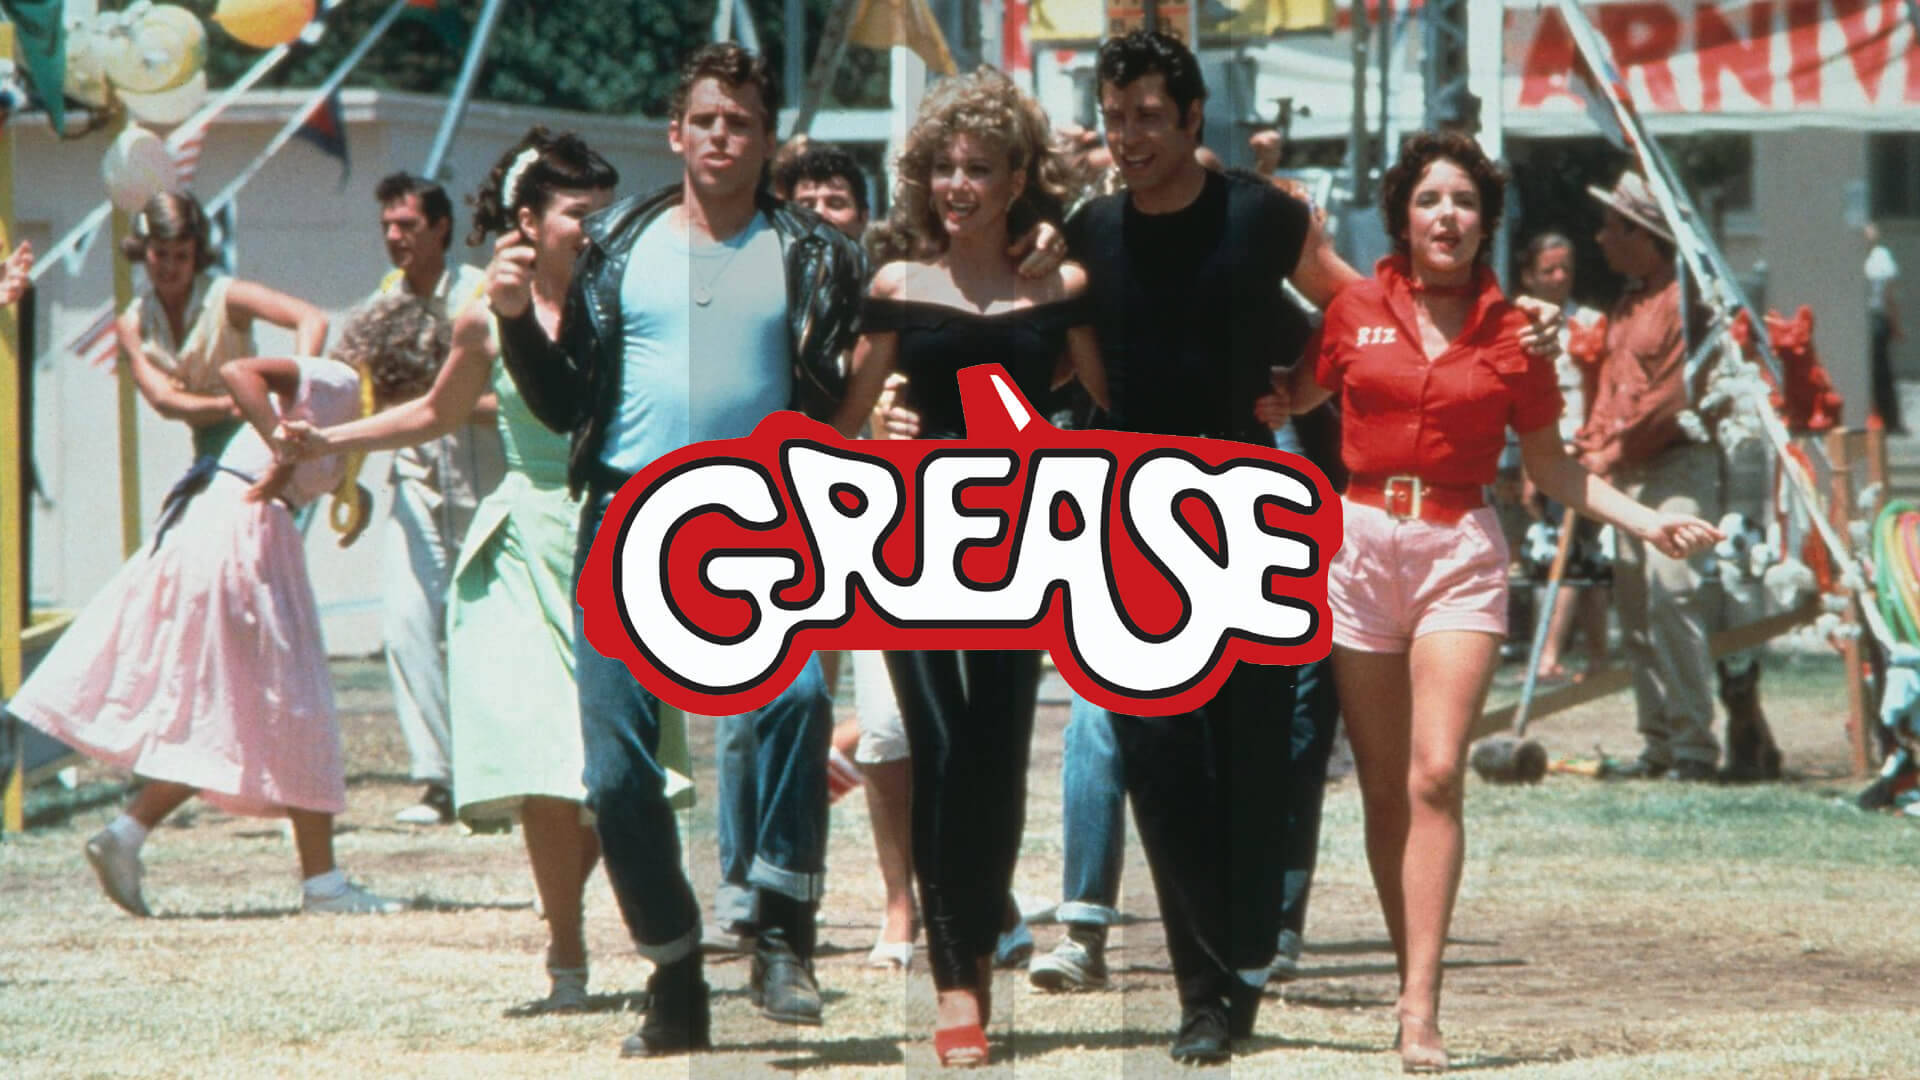 Grease Wallpaper Images